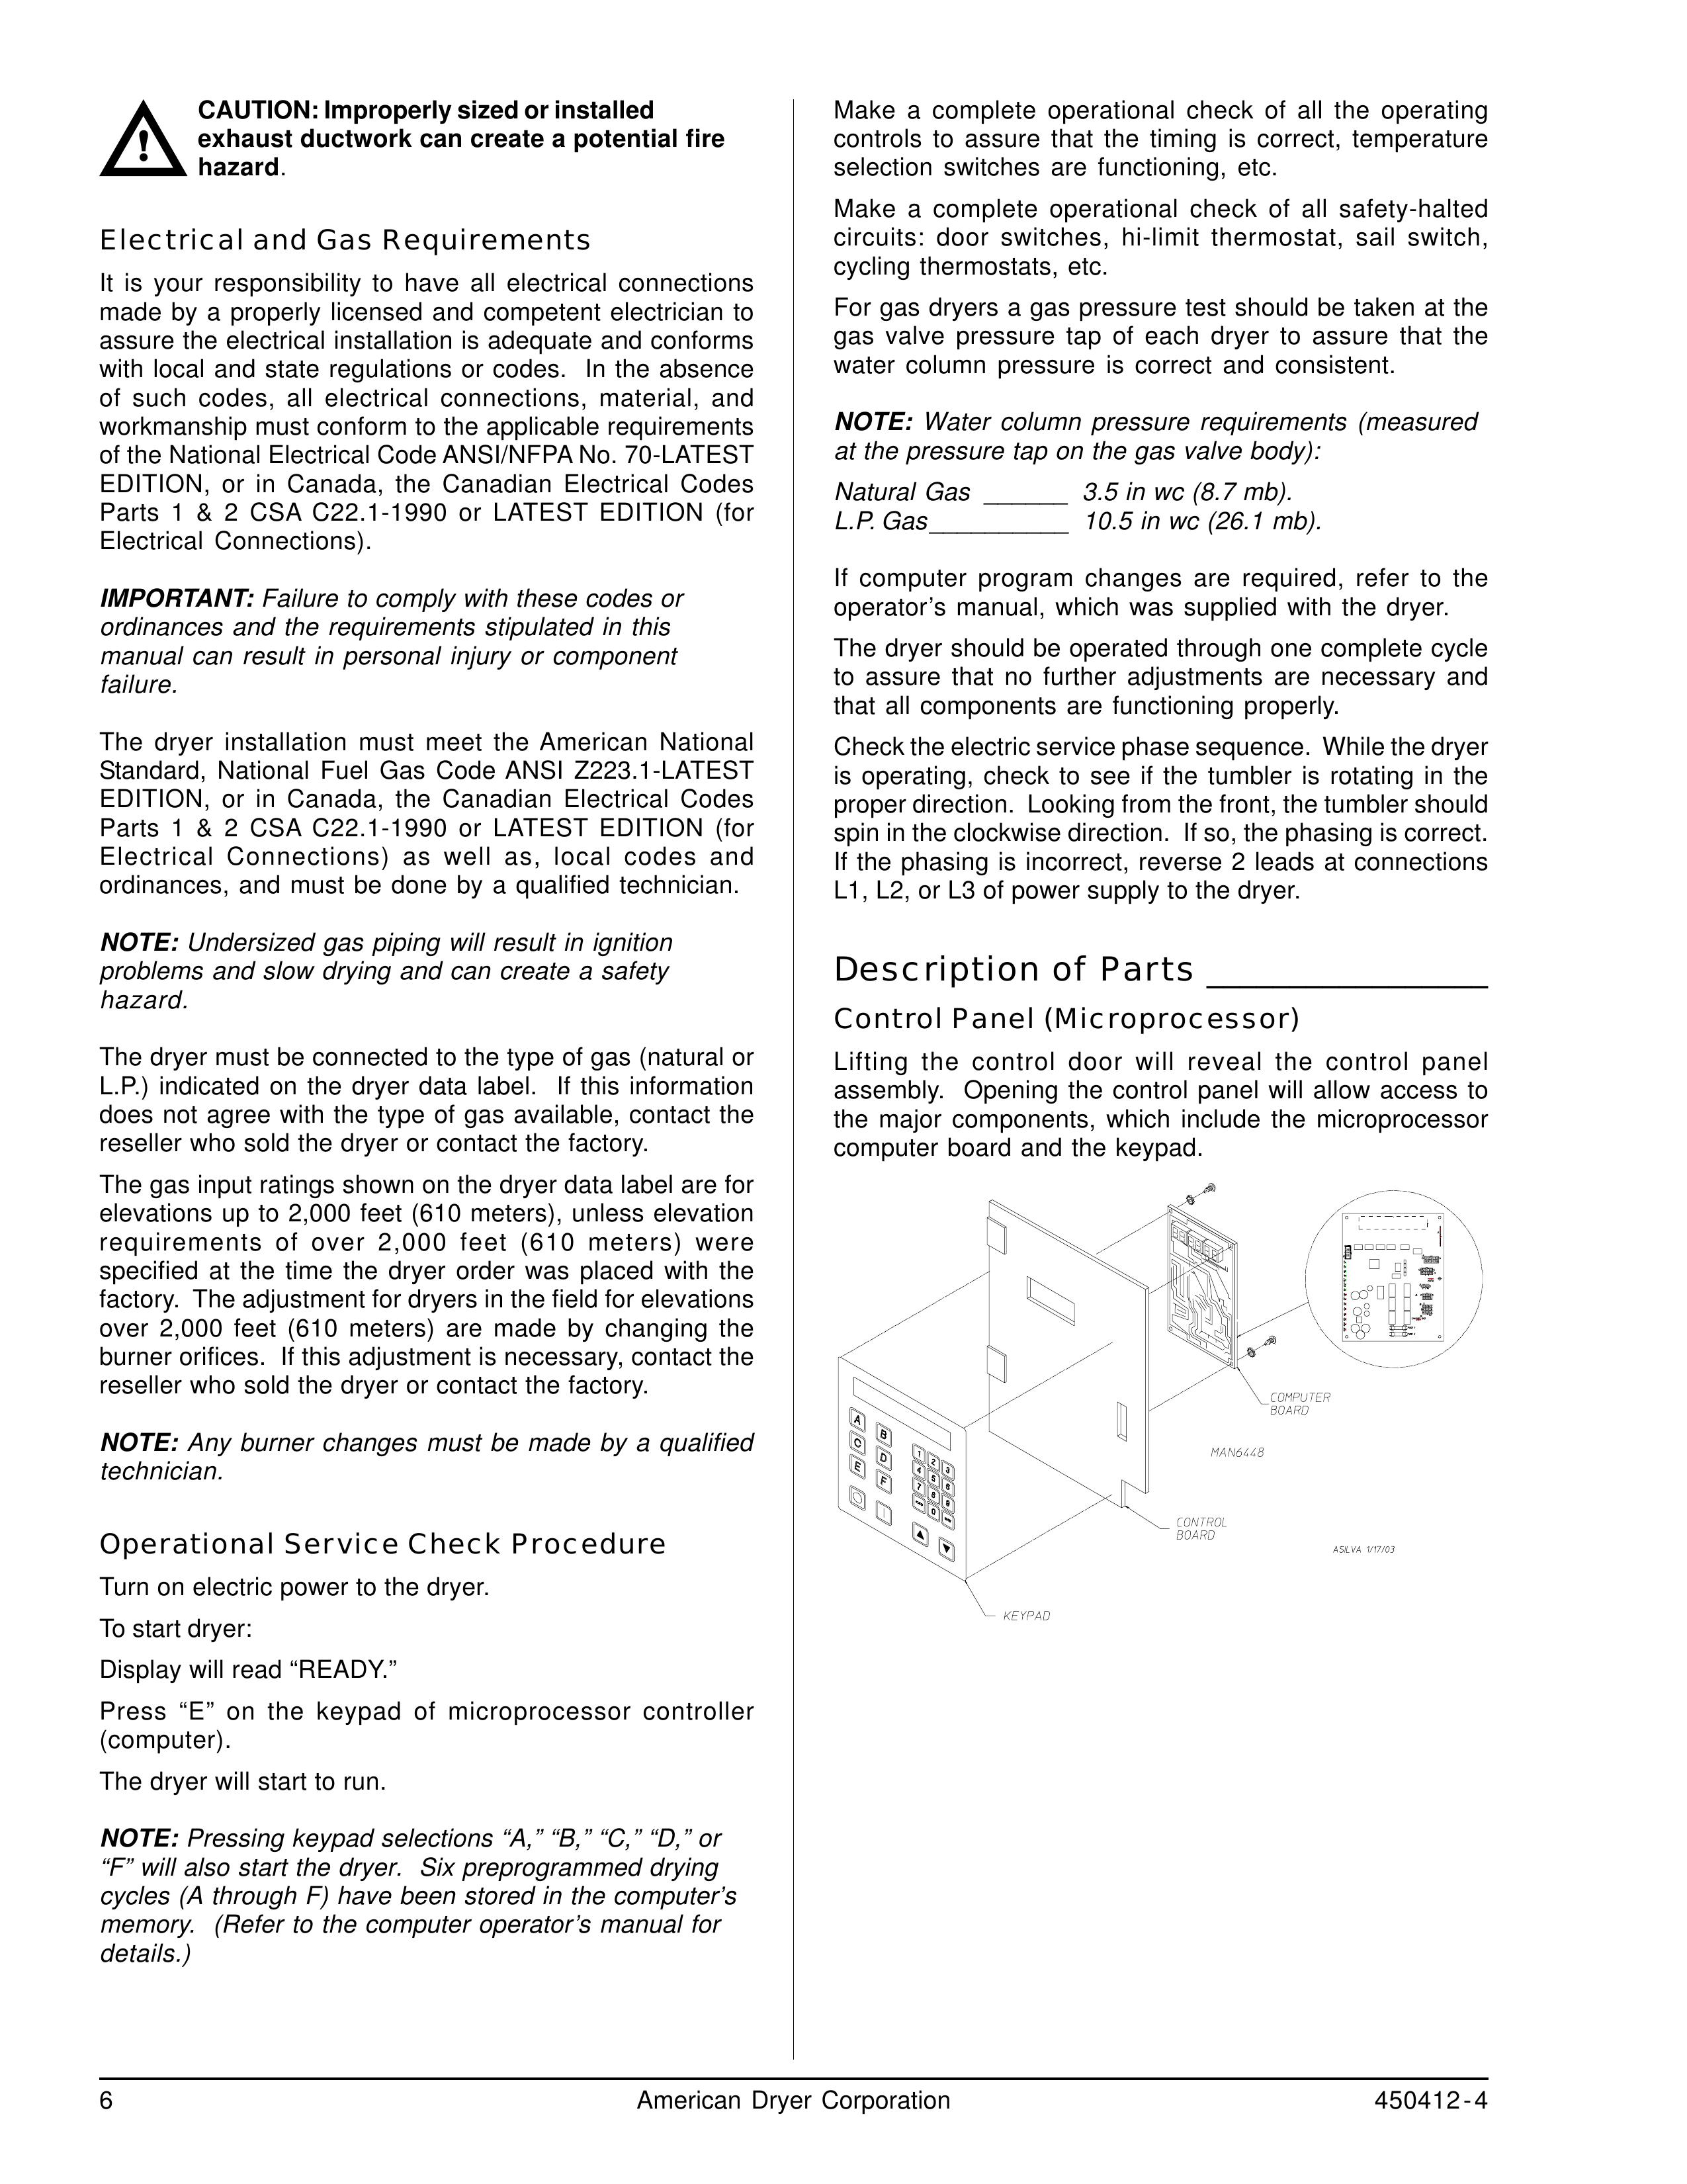 ADC ML-122 Clothes Dryer User Manual (Page 6)